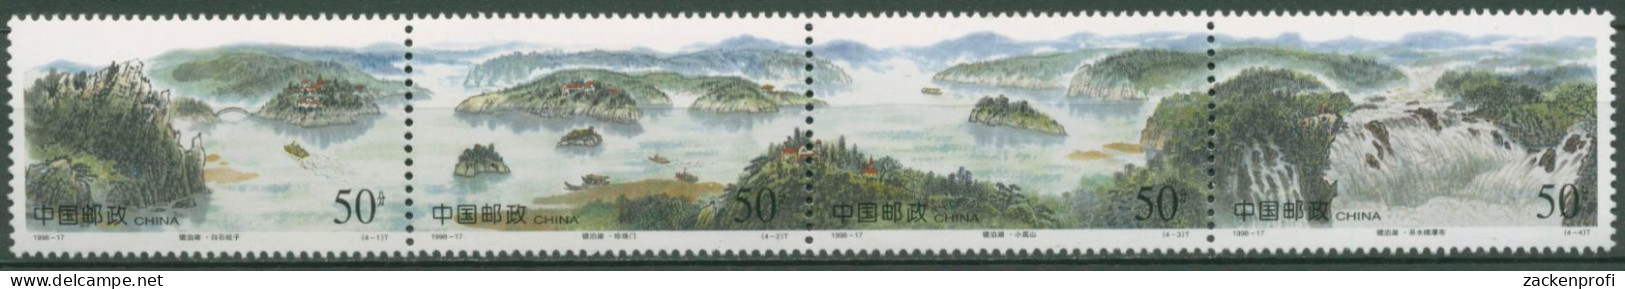 China 1998 Jingpo-See Wasserfall 2930/33 ZD Postfrisch (C62752) - Unused Stamps